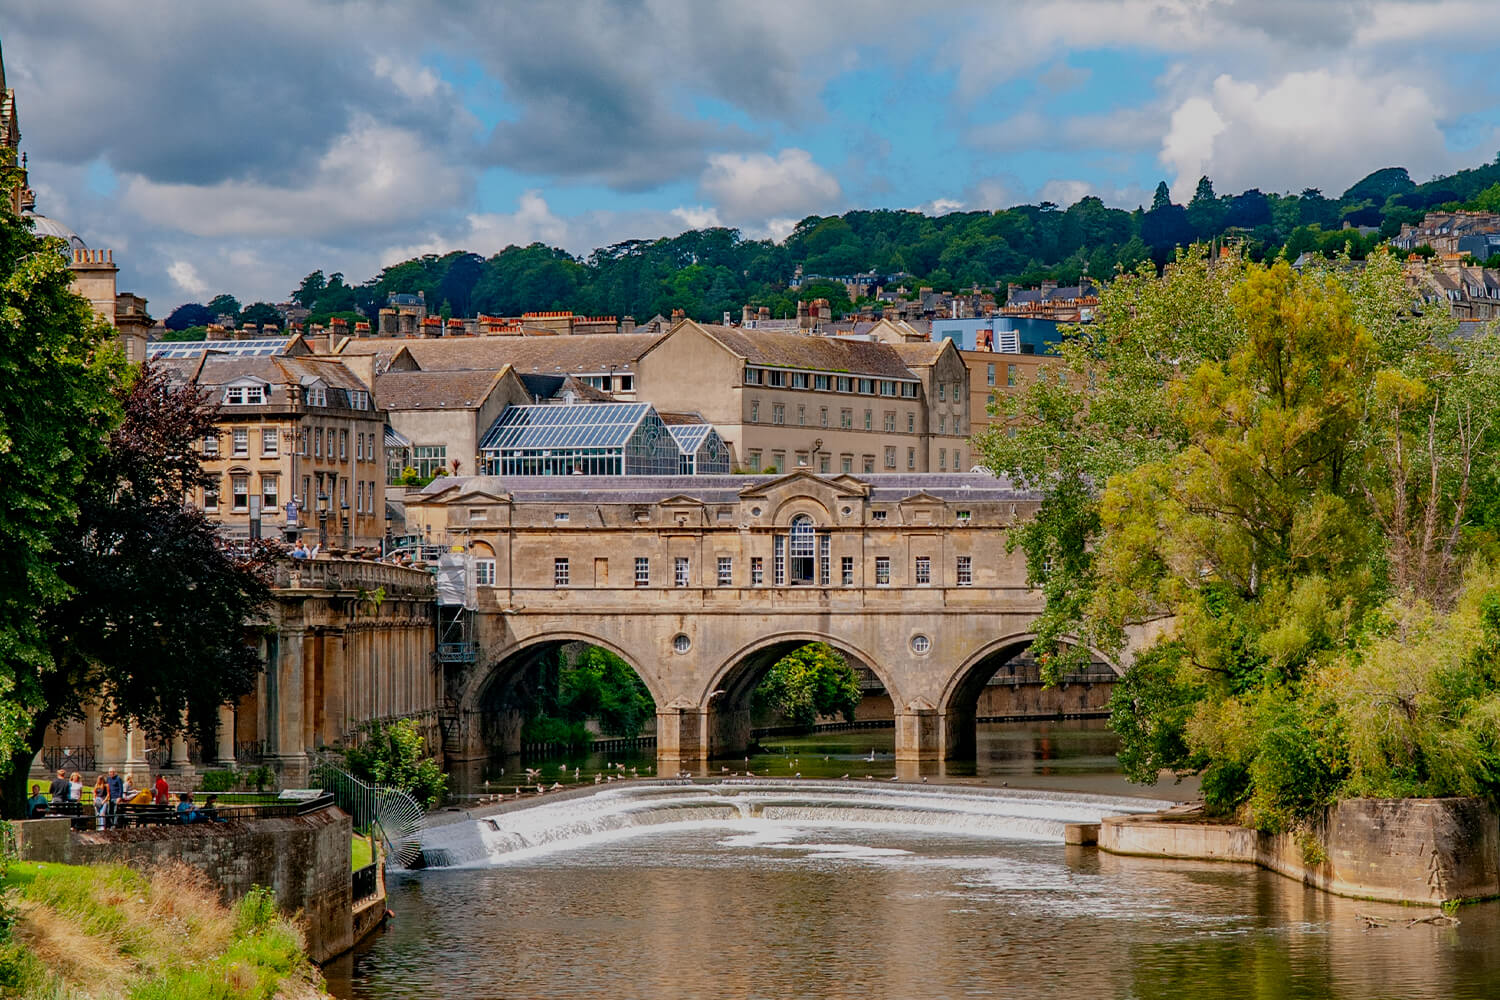 View of the river in Bath city centre